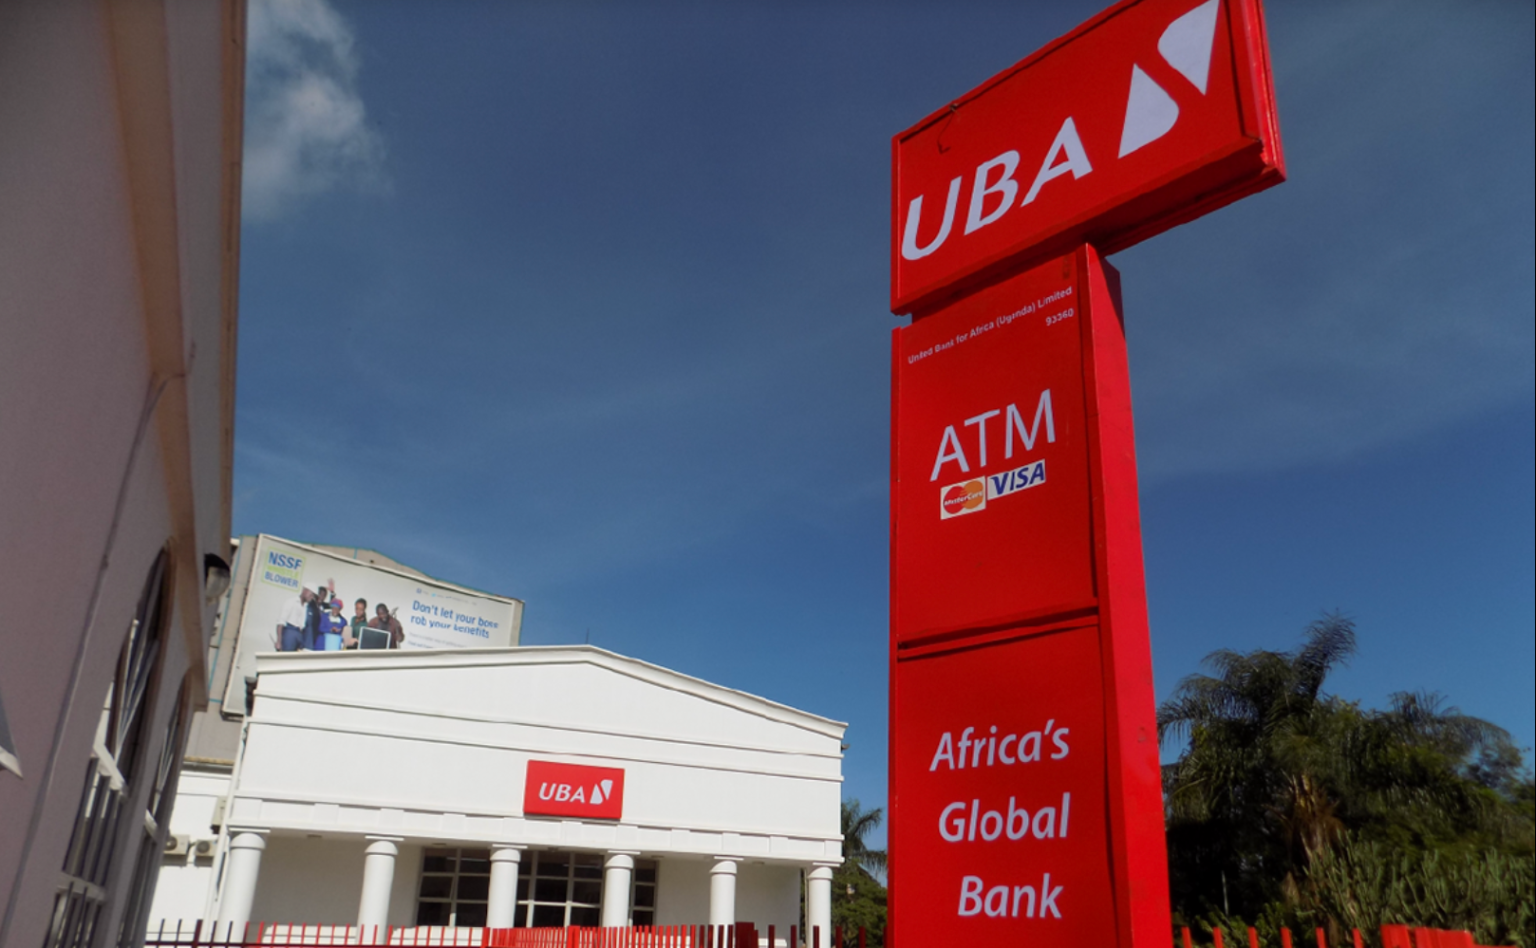 United Bank for Africa dismisses claims of shs1bn stolen from client's account